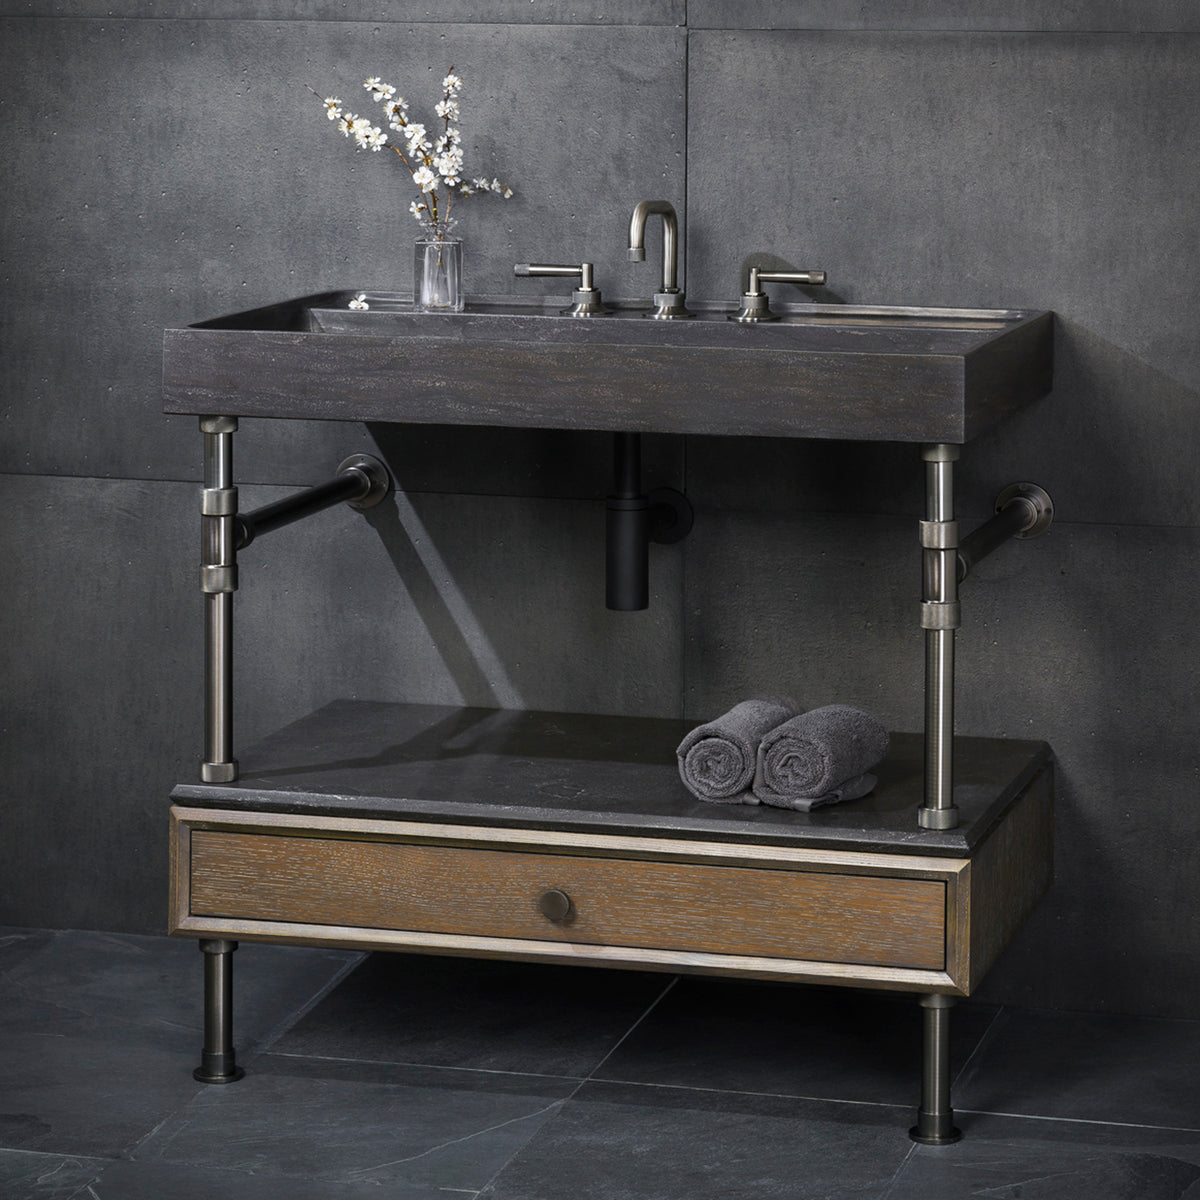 Ventus Bath Sink with Faucet Deck in antique gray limestone paired with Elemental Classic Drawer Vanity in graphite with matching stone Shelf Cap image 1 of 3